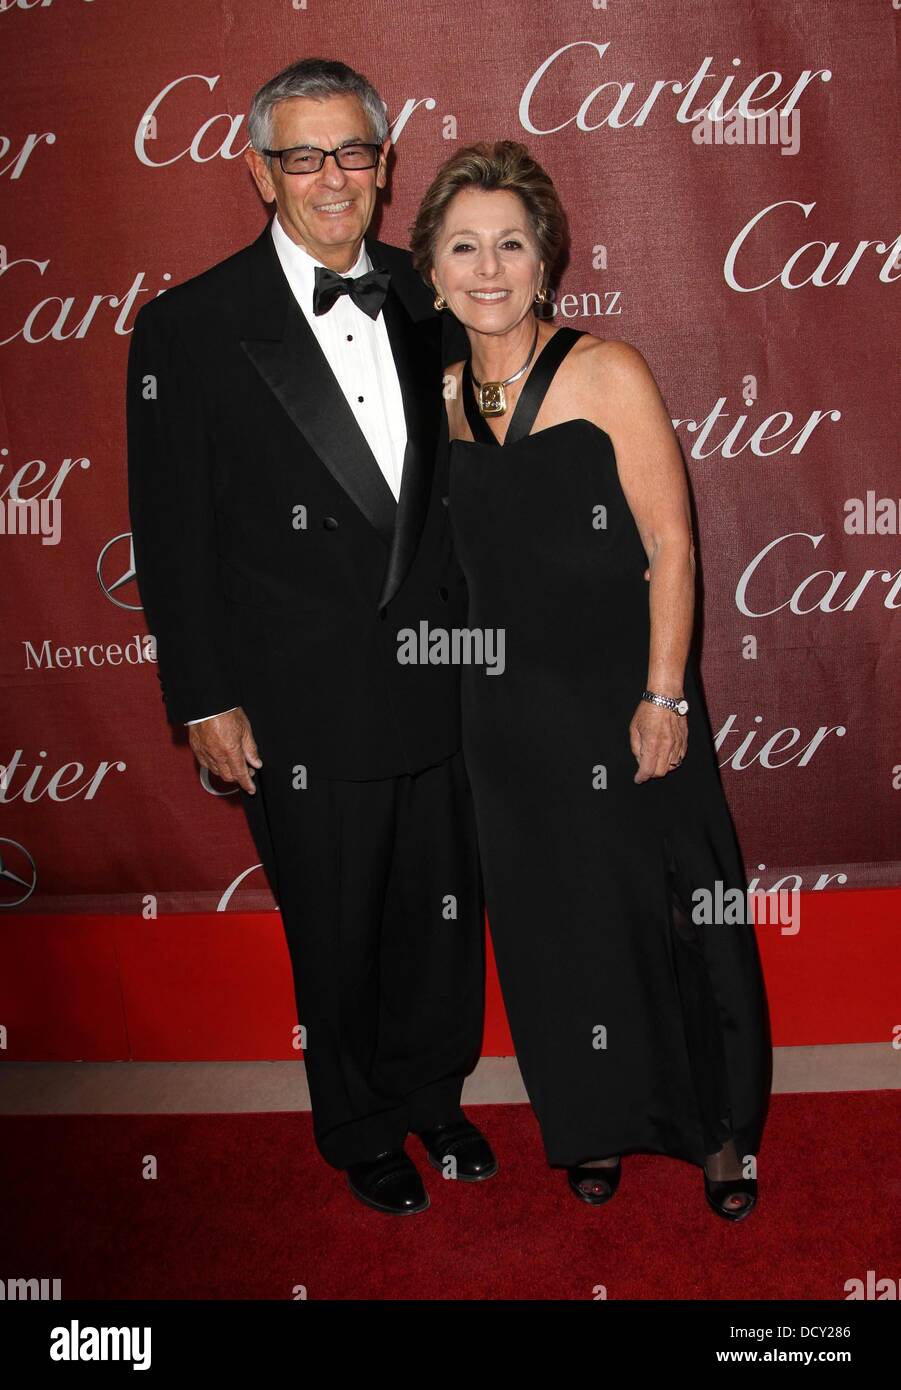 Stewart Boxer and Barbara Boxer The 23rd annual Palm Springs International Film Festival Awards Gala at The Palm Springs Convention Center - Arrivals Los Angeles, California - 07.01.12 Stock Photo